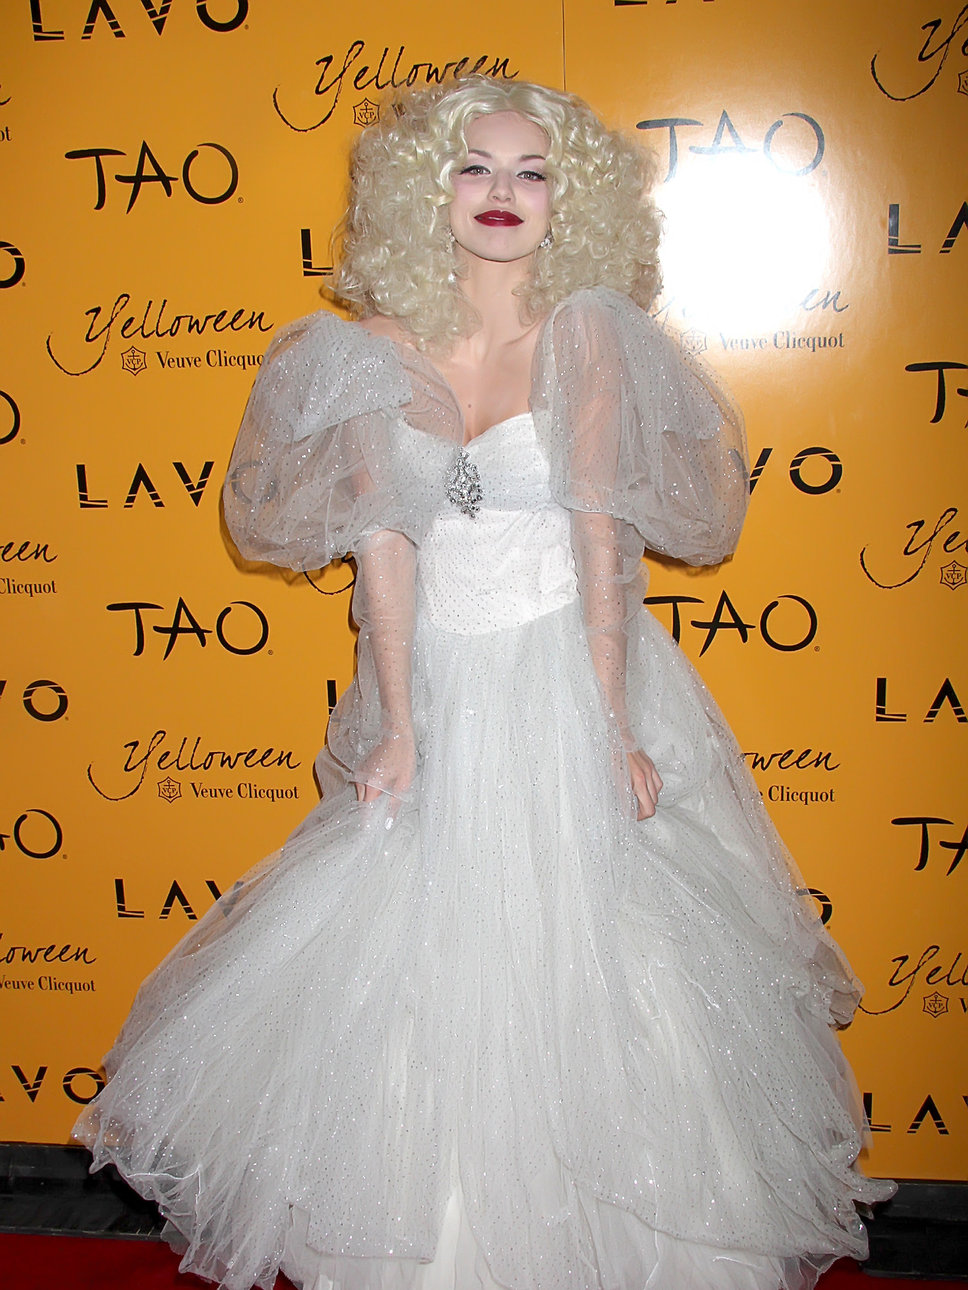 10. AnnaLynne McCord looked super pretty as a ghost bride. Even though her costume wasn